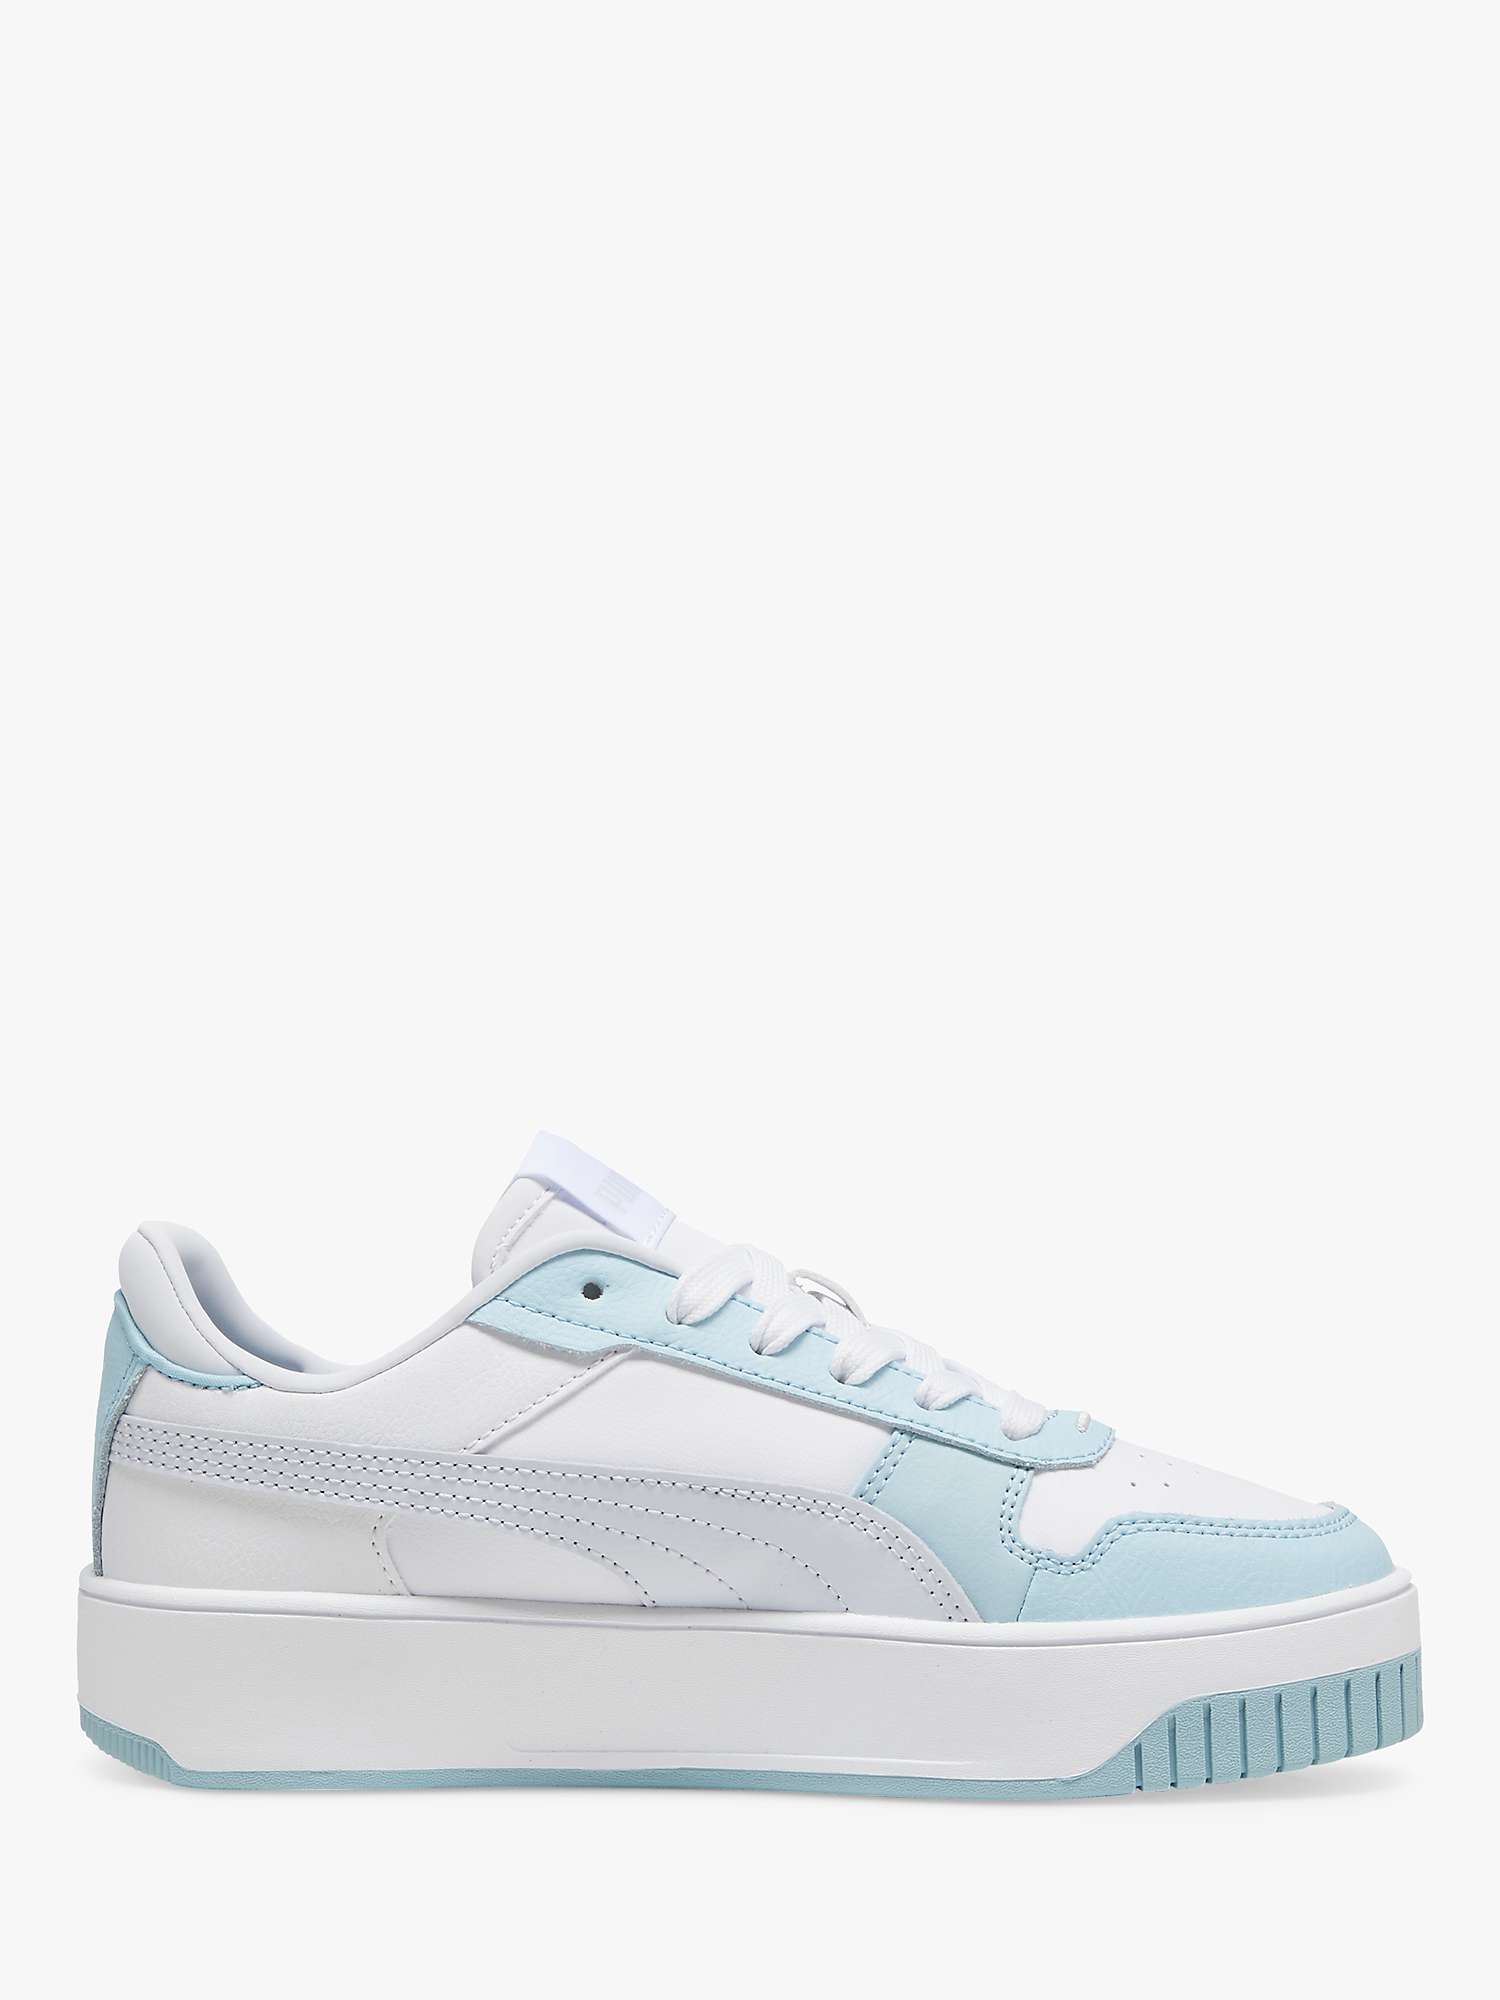 Buy PUMA Kids' Carina Street Jr Leather Trainers, White/Blue Online at johnlewis.com